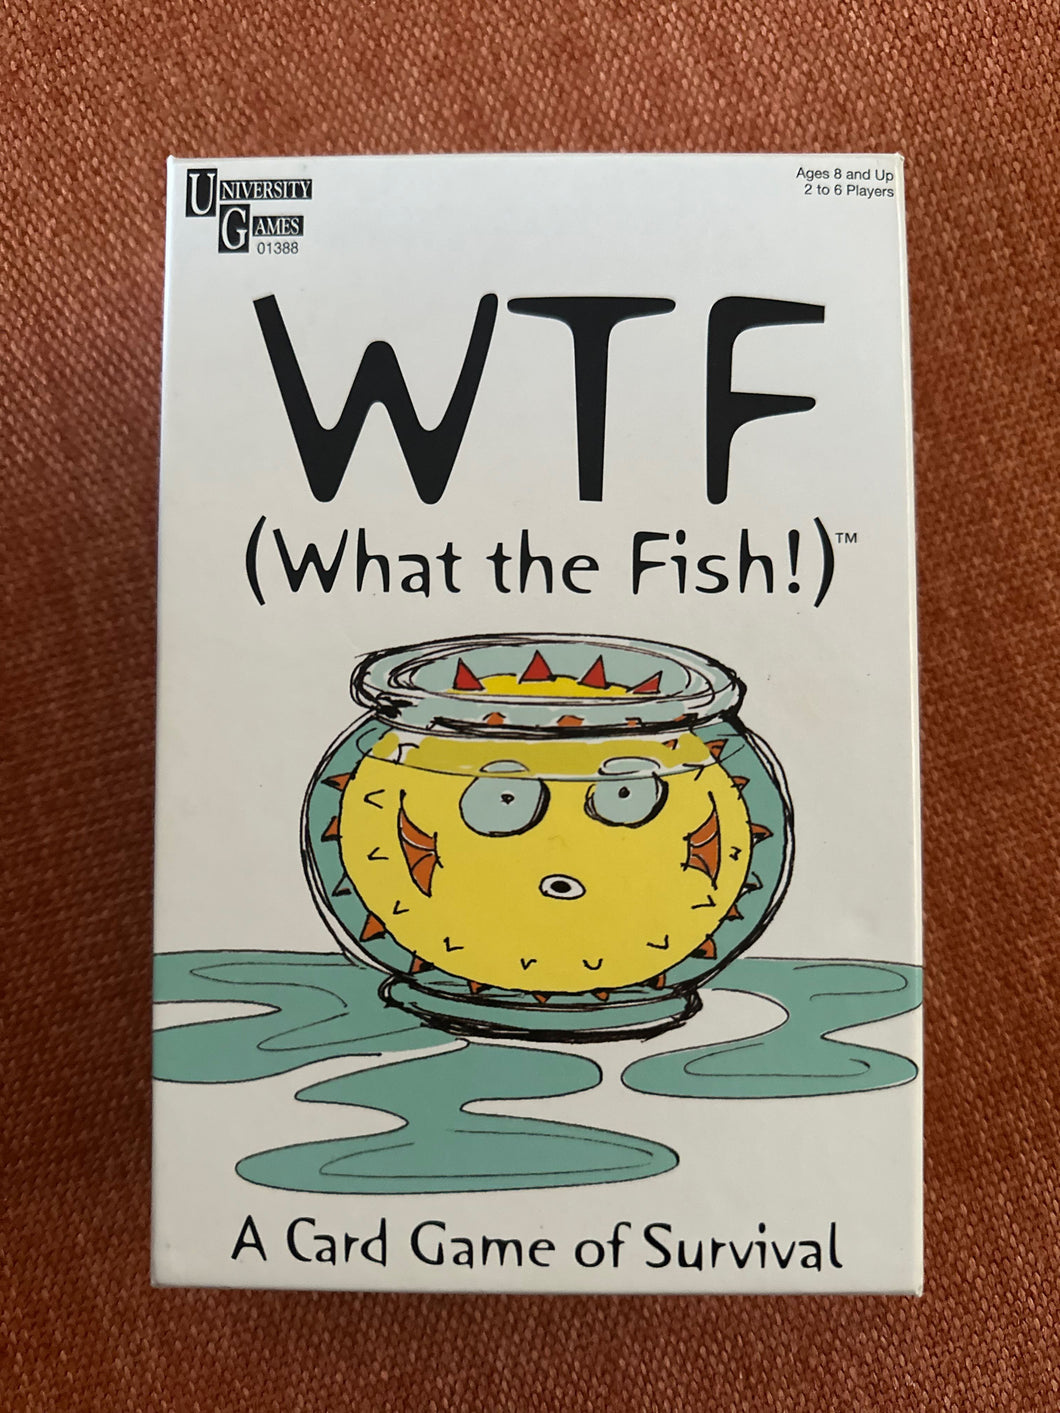 University Games What the Fish Card Game